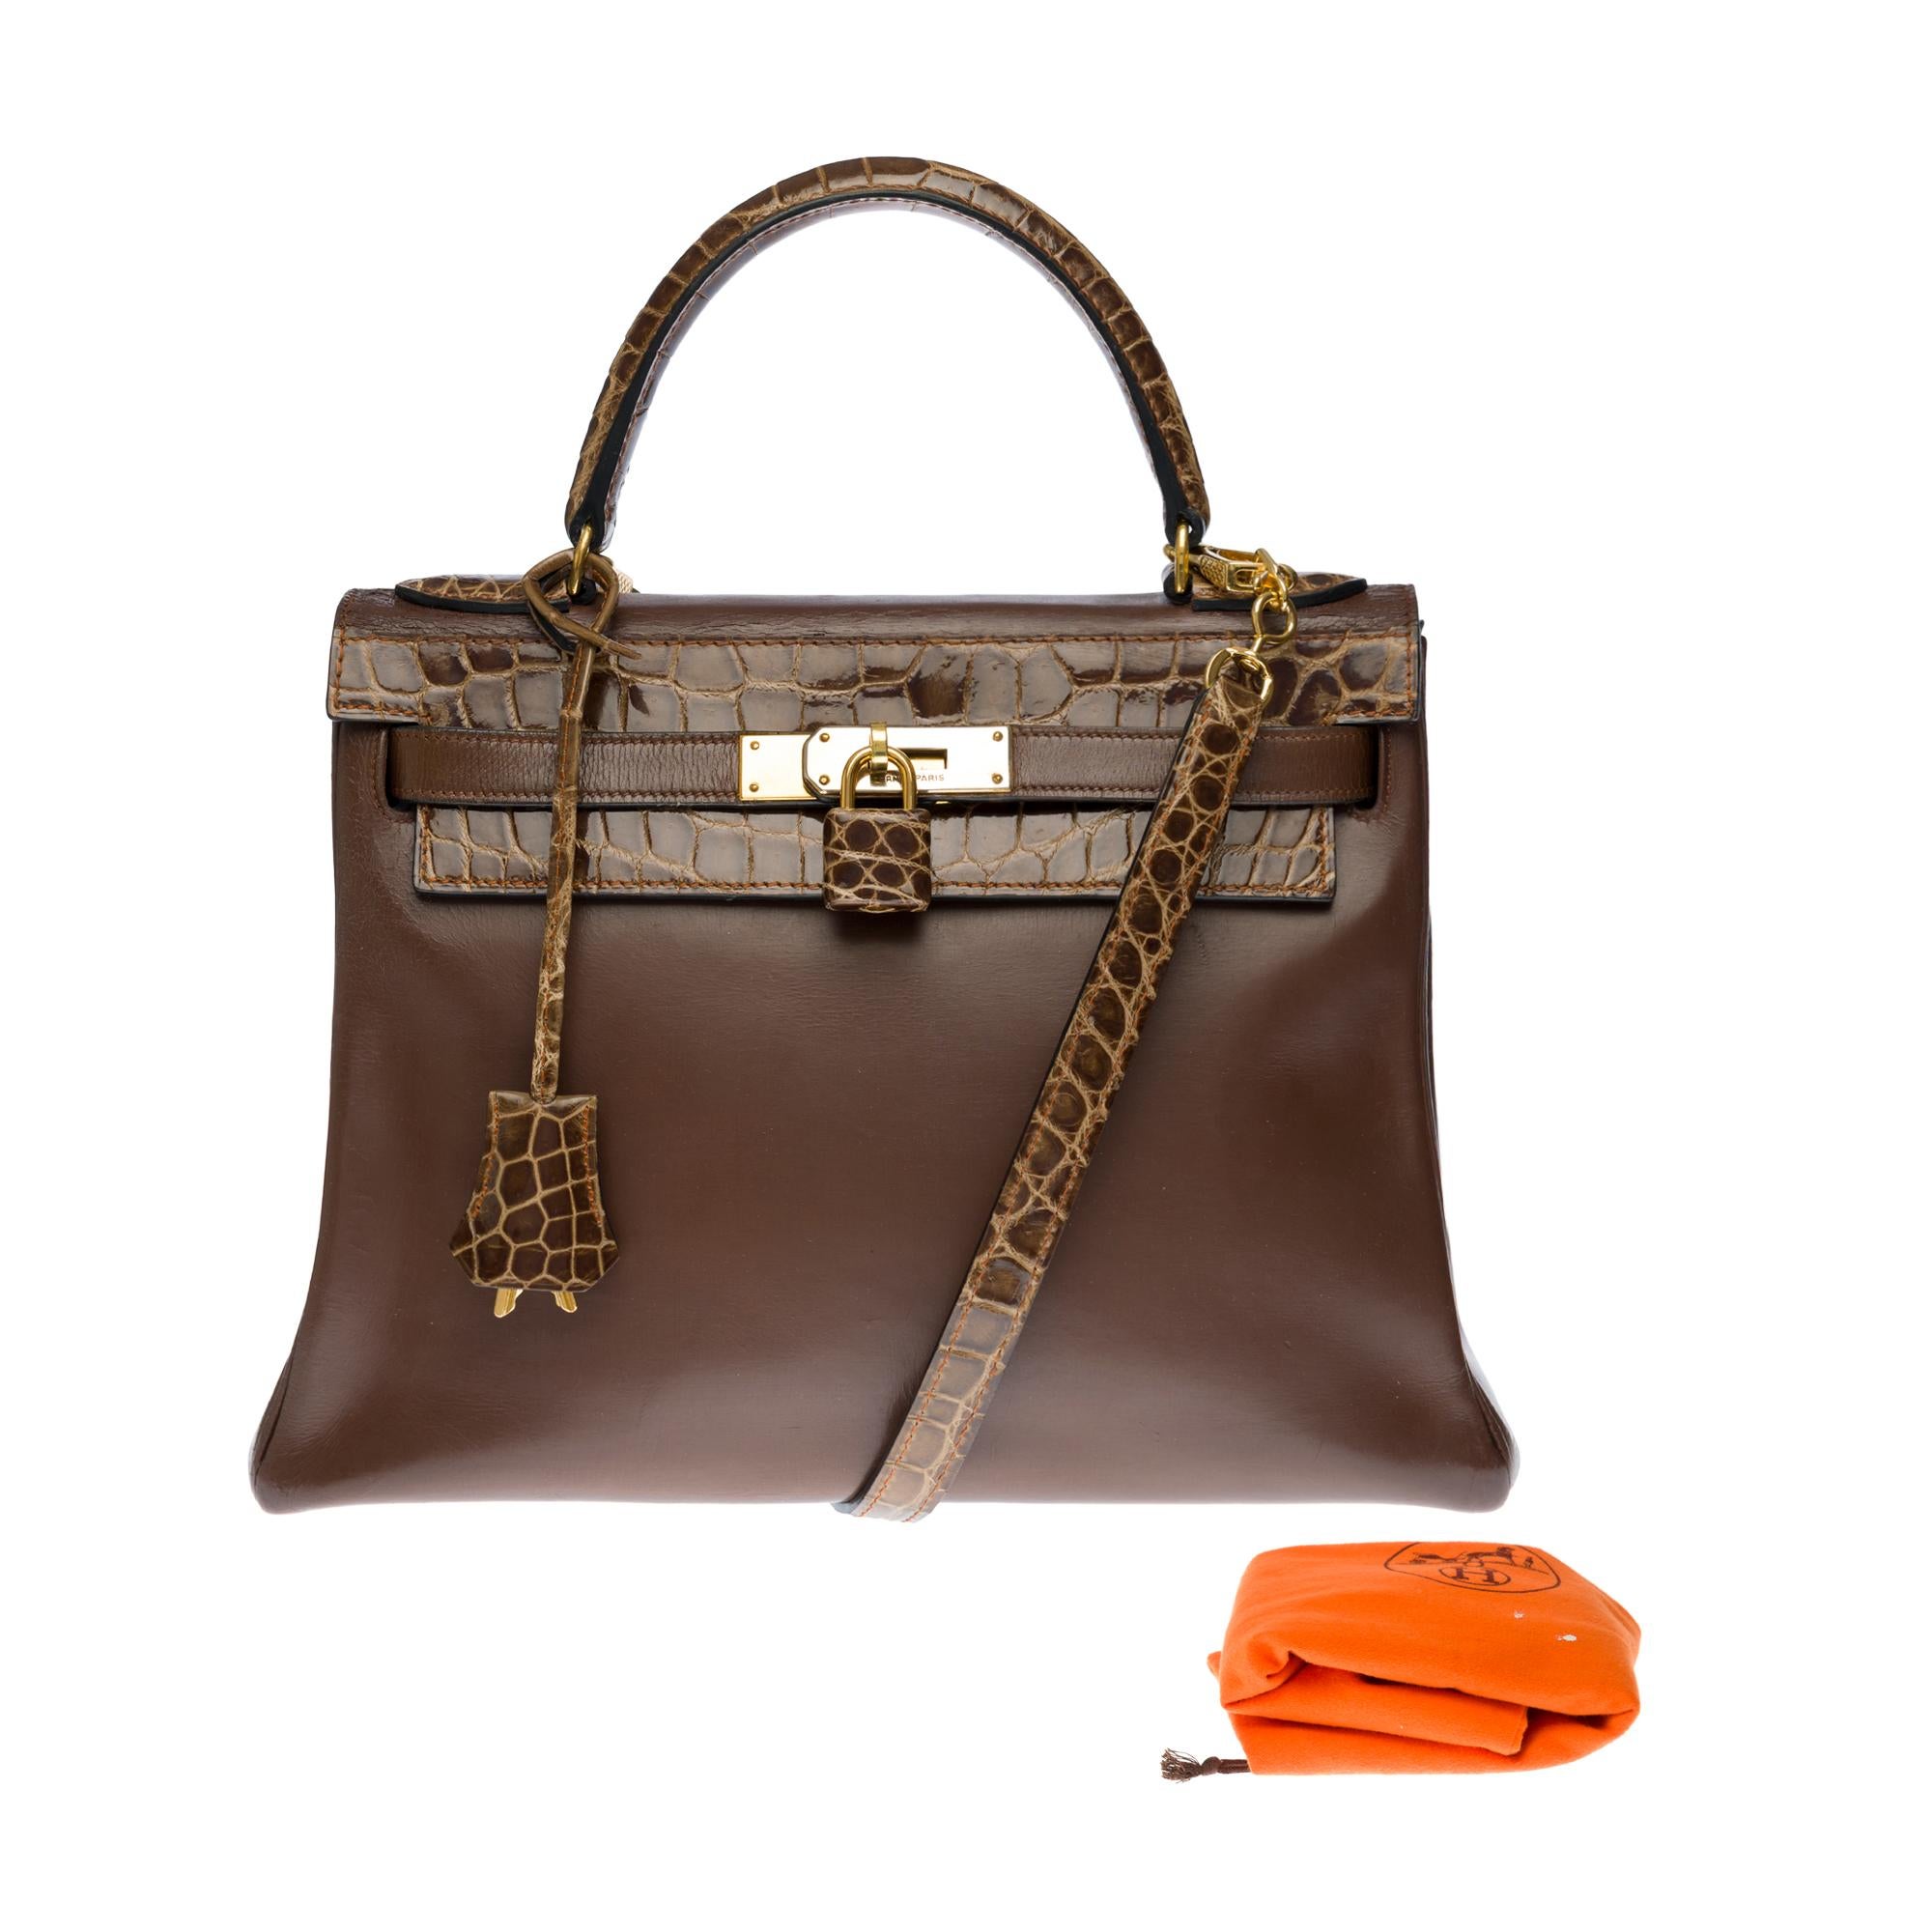 Customized Hermès Kelly 28 in brown calfskin strap with brown Crocodile, GHW  7